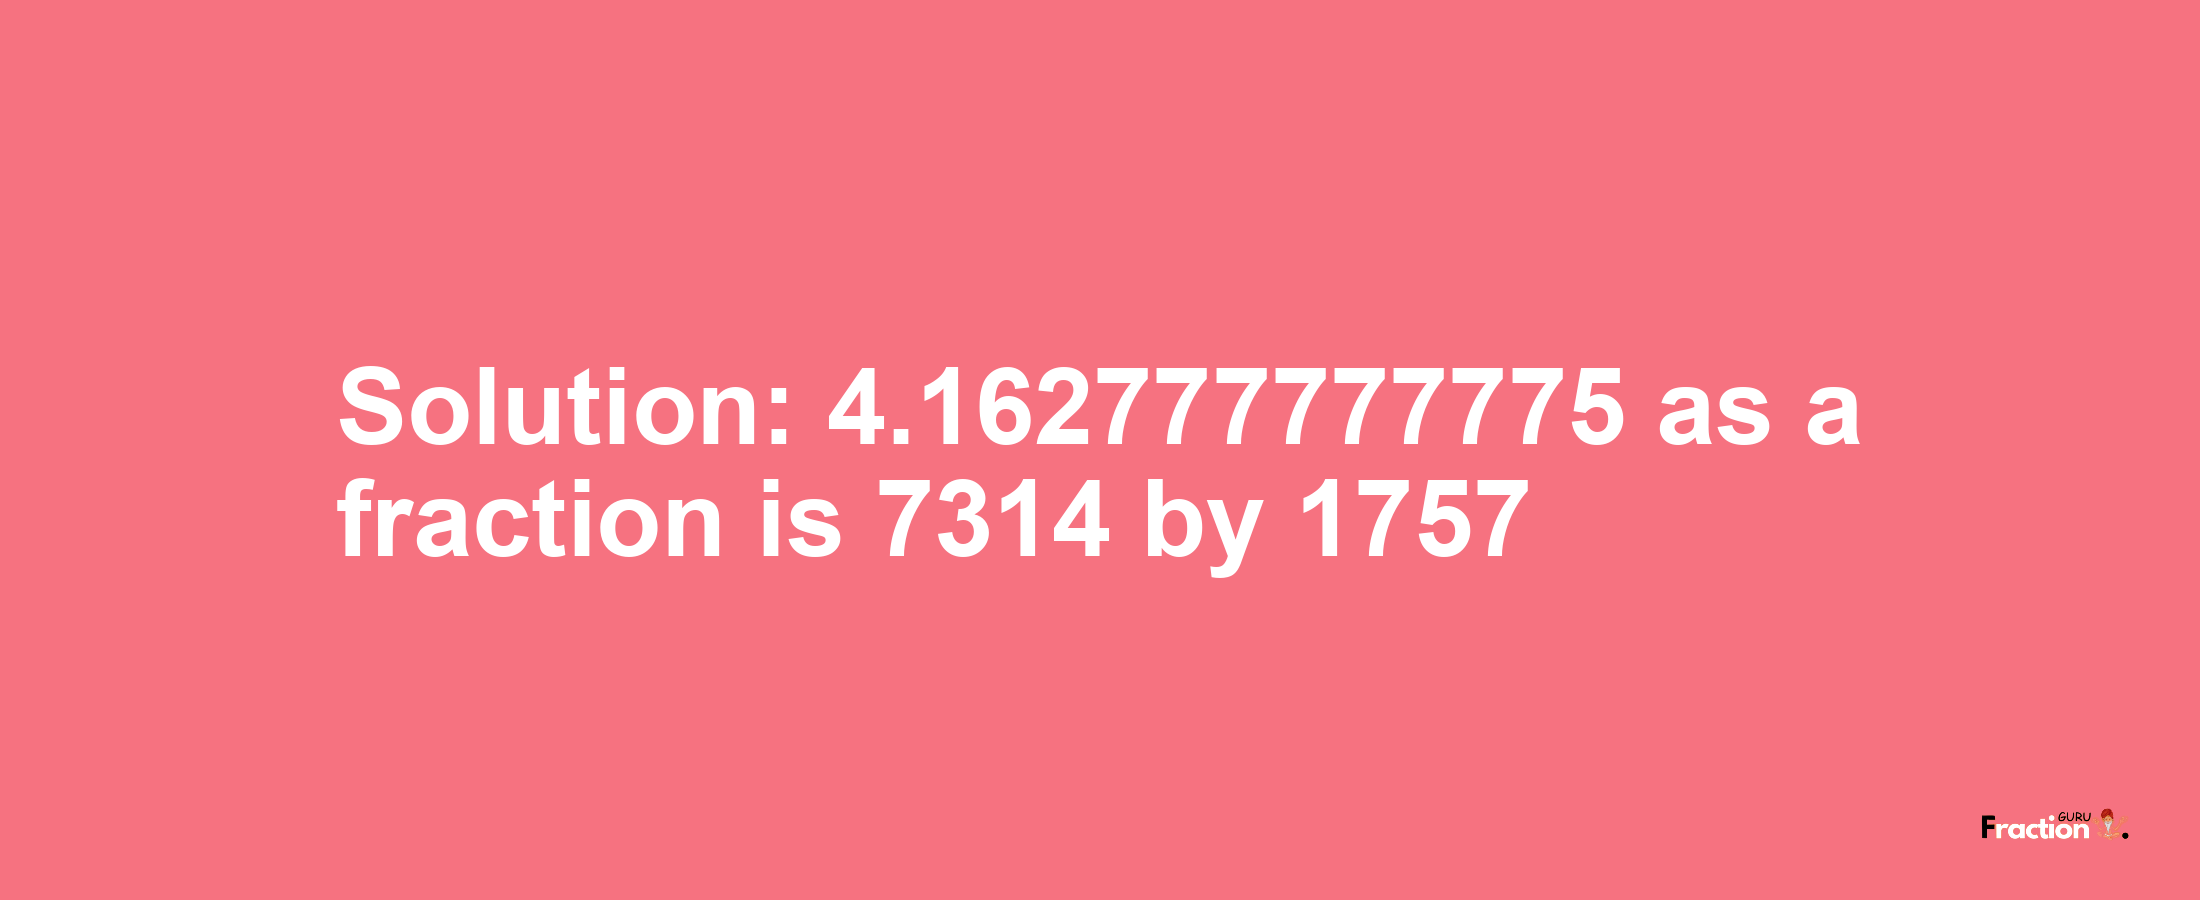 Solution:4.162777777775 as a fraction is 7314/1757